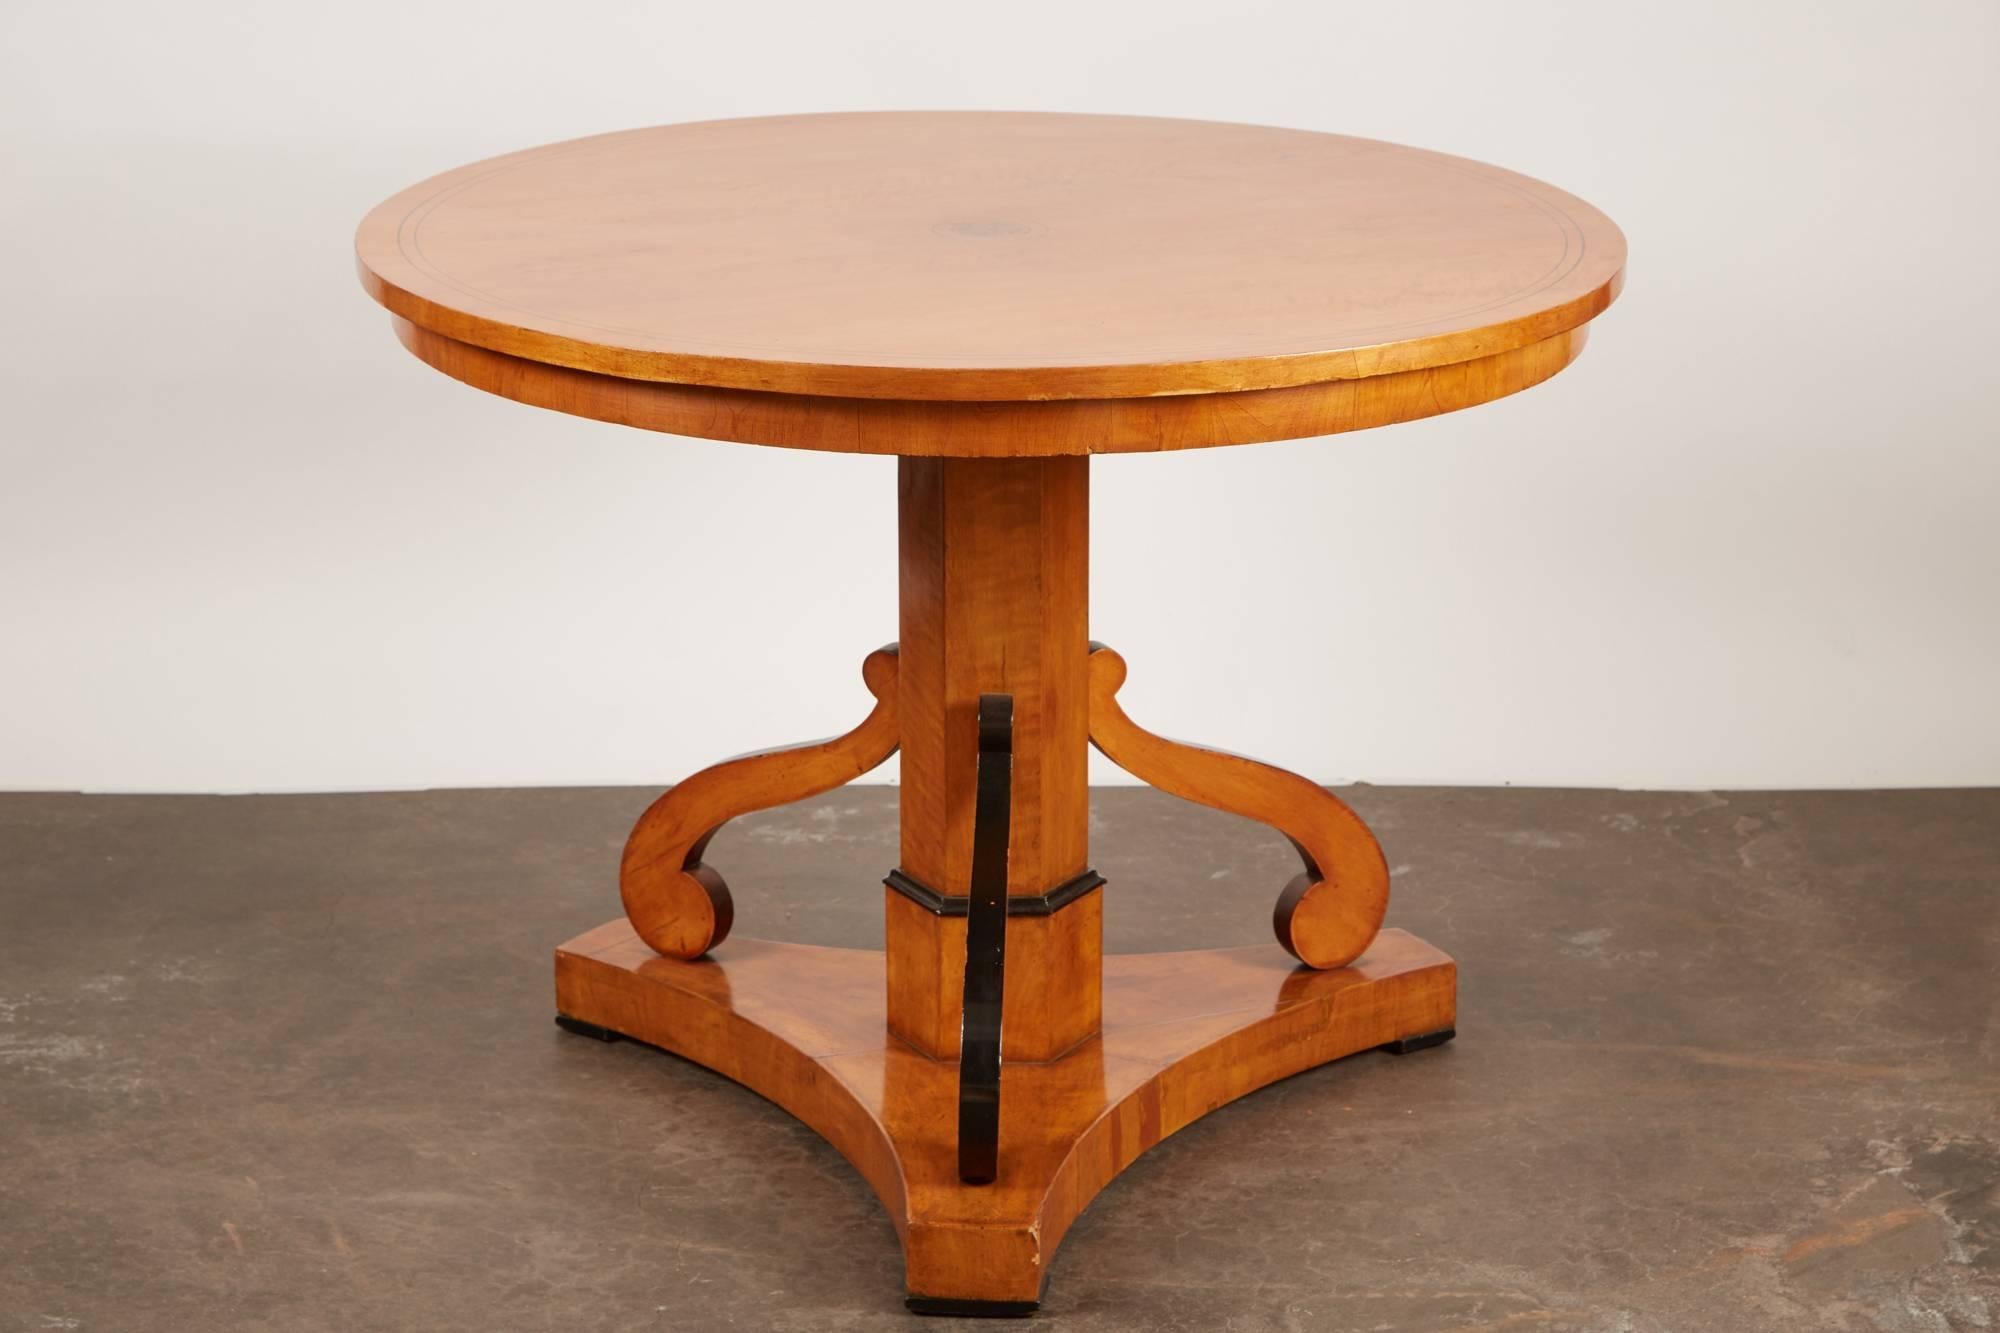 An early 20th century Swedish ebonized cheerywood second period Biedermeier pedestal table featuring a set of three scroll cut supports that surround a center octagonal pillar atop a triangle base.